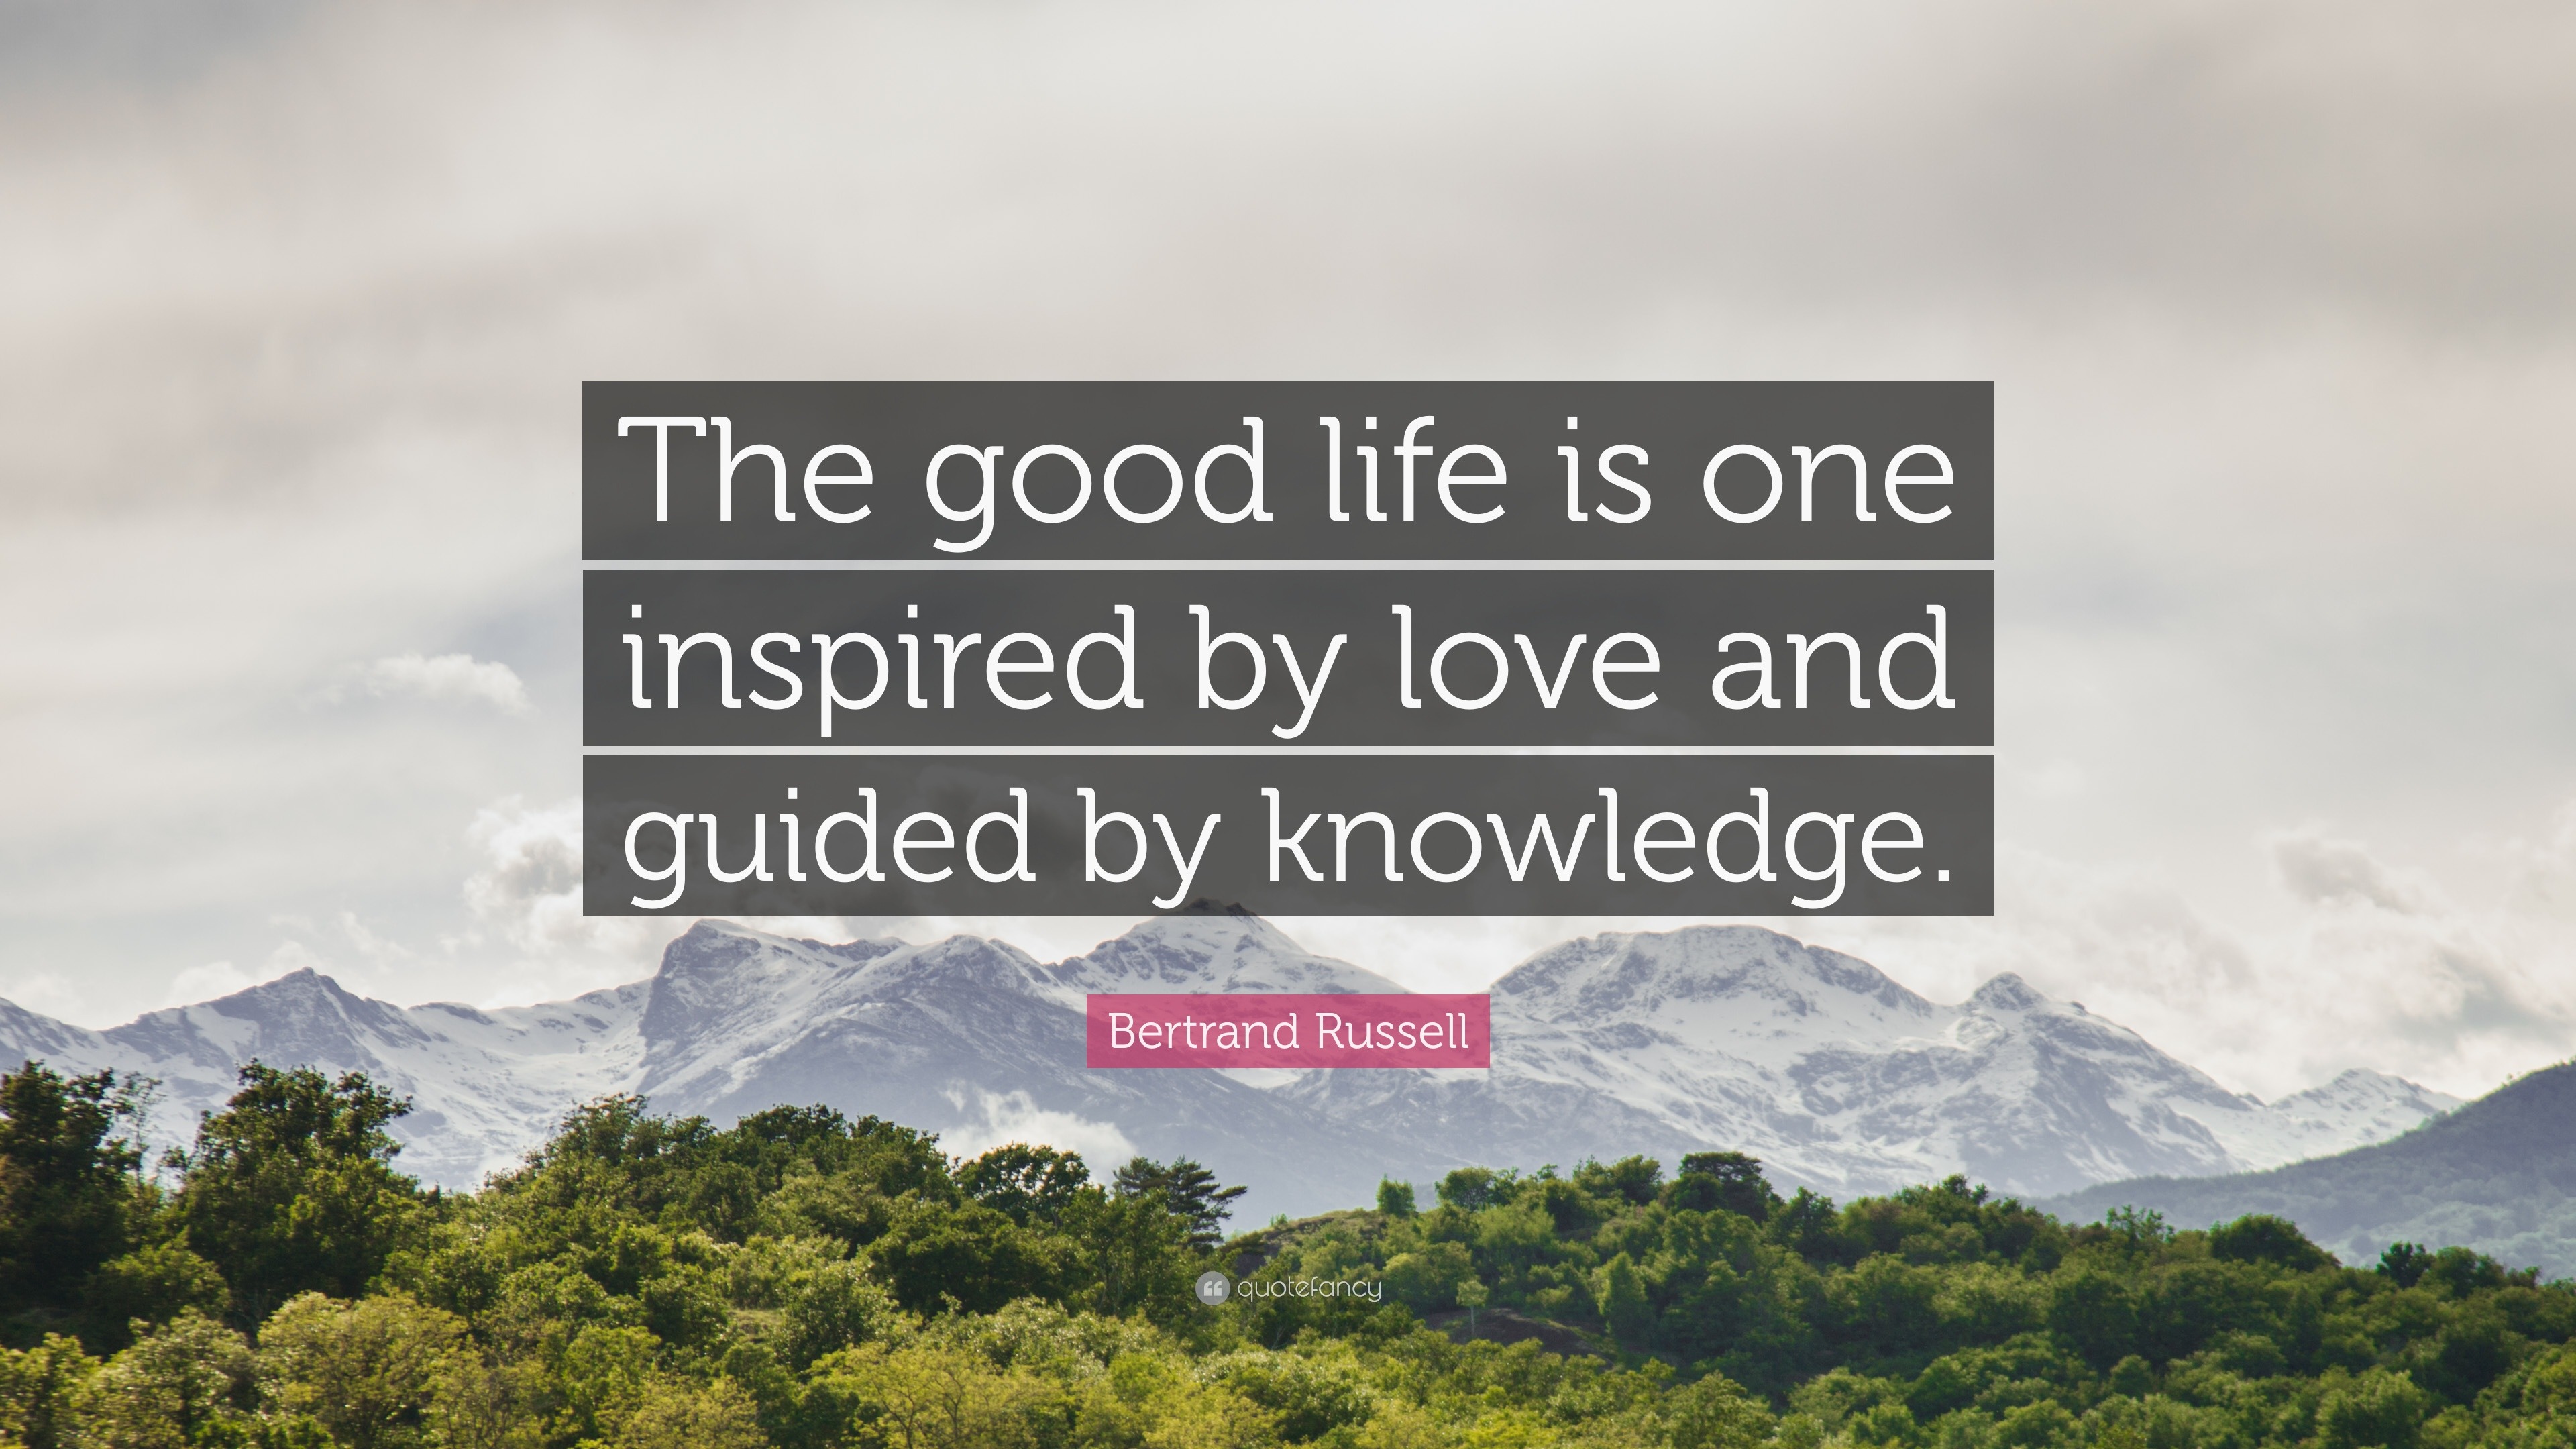 Bertrand Russell Quote The Good Life Is One Inspired By Love And Guided By Knowledge